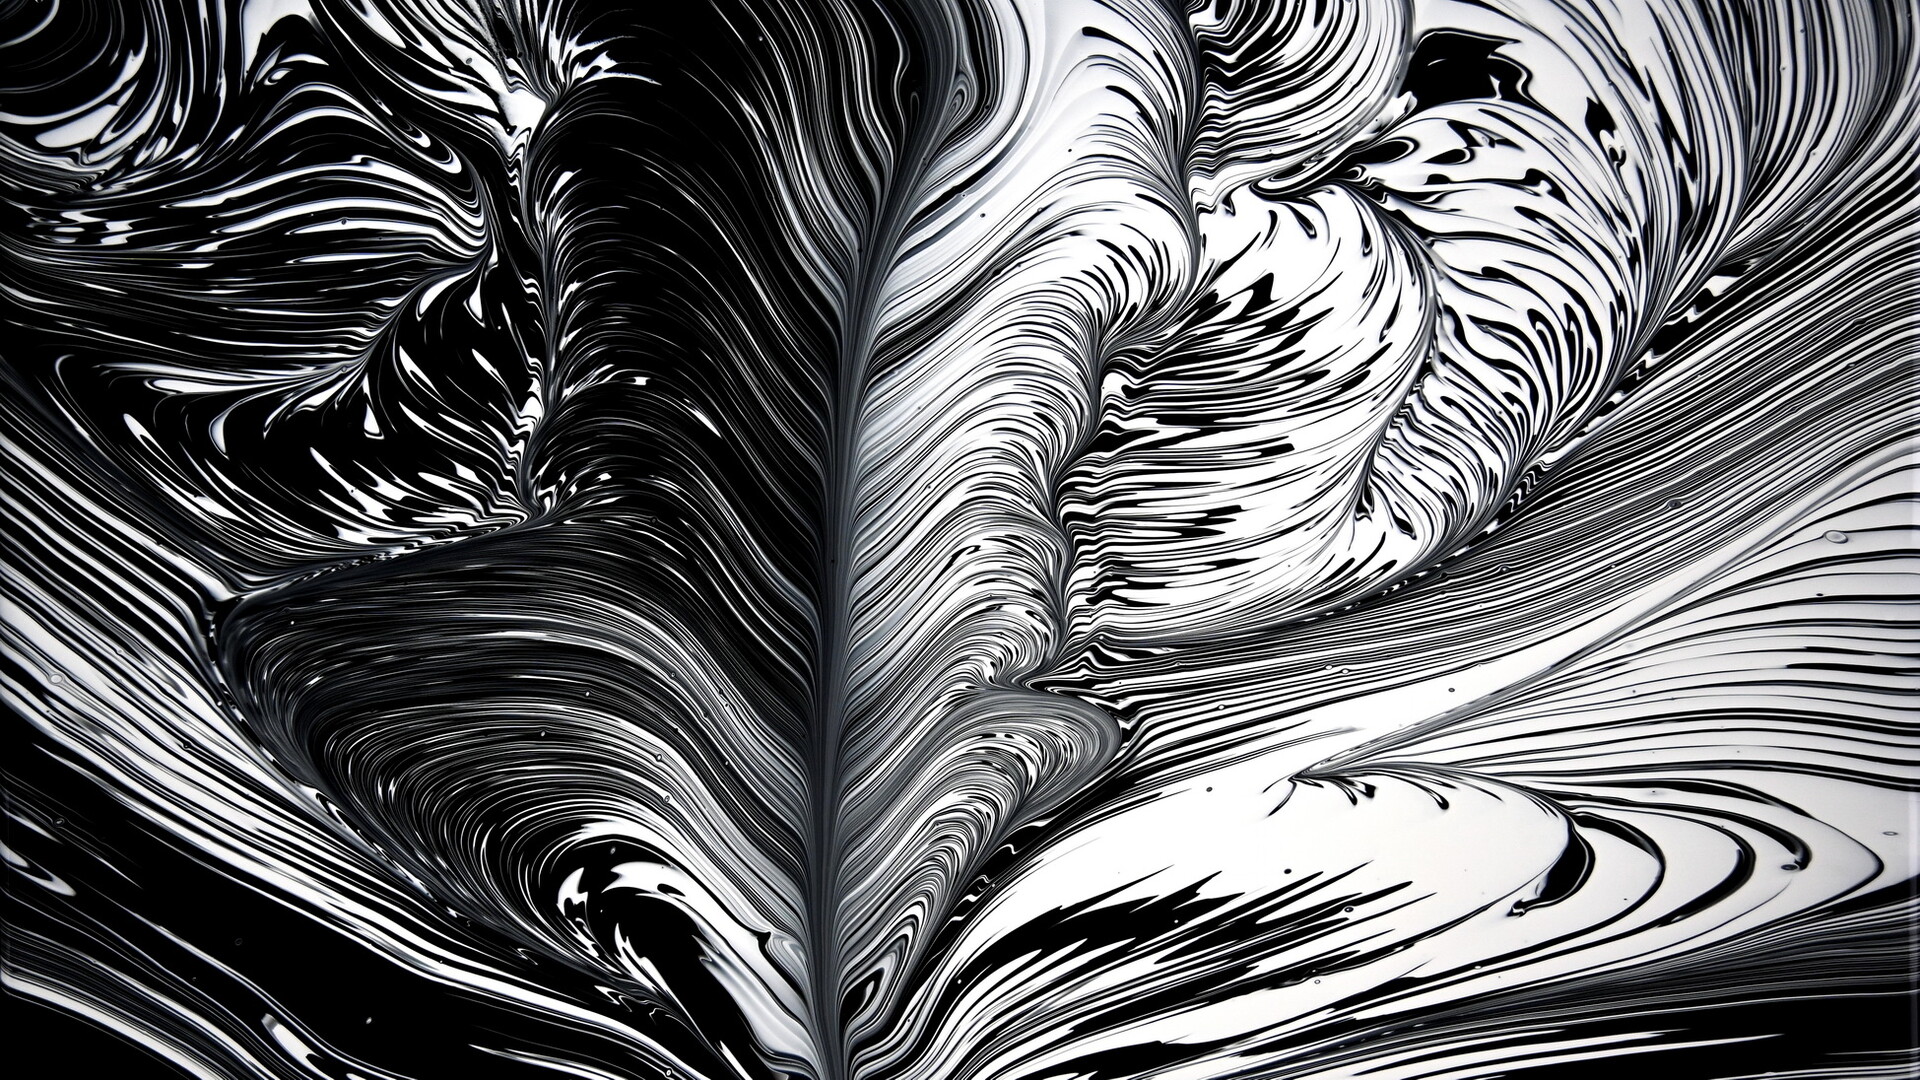 ArtStation - Black and White acrylic pour painting ~ Acrylic pouring with  Split cup